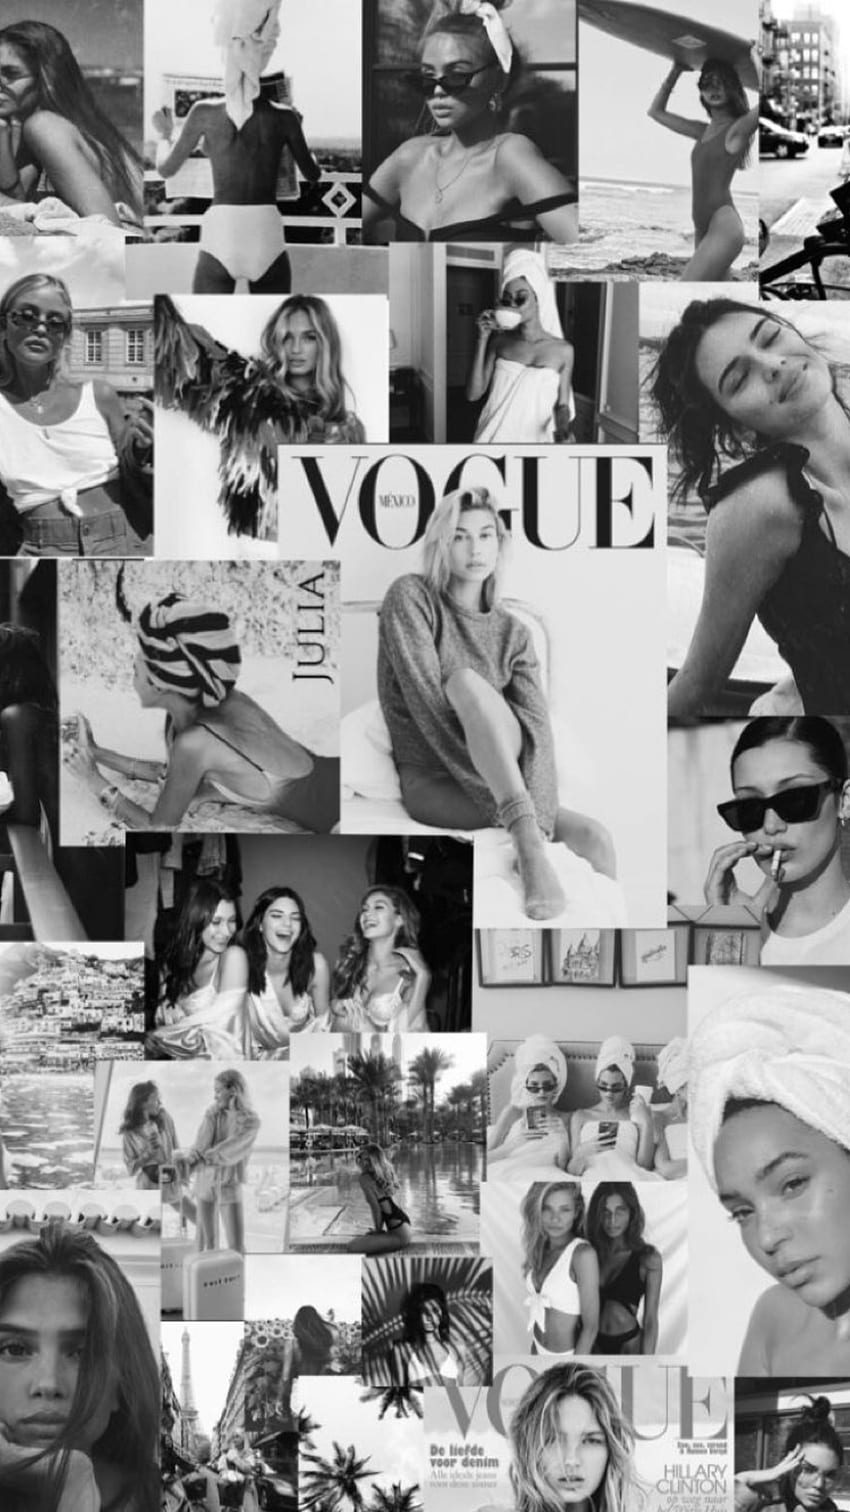 A collage of photos of models and magazine covers - Vogue